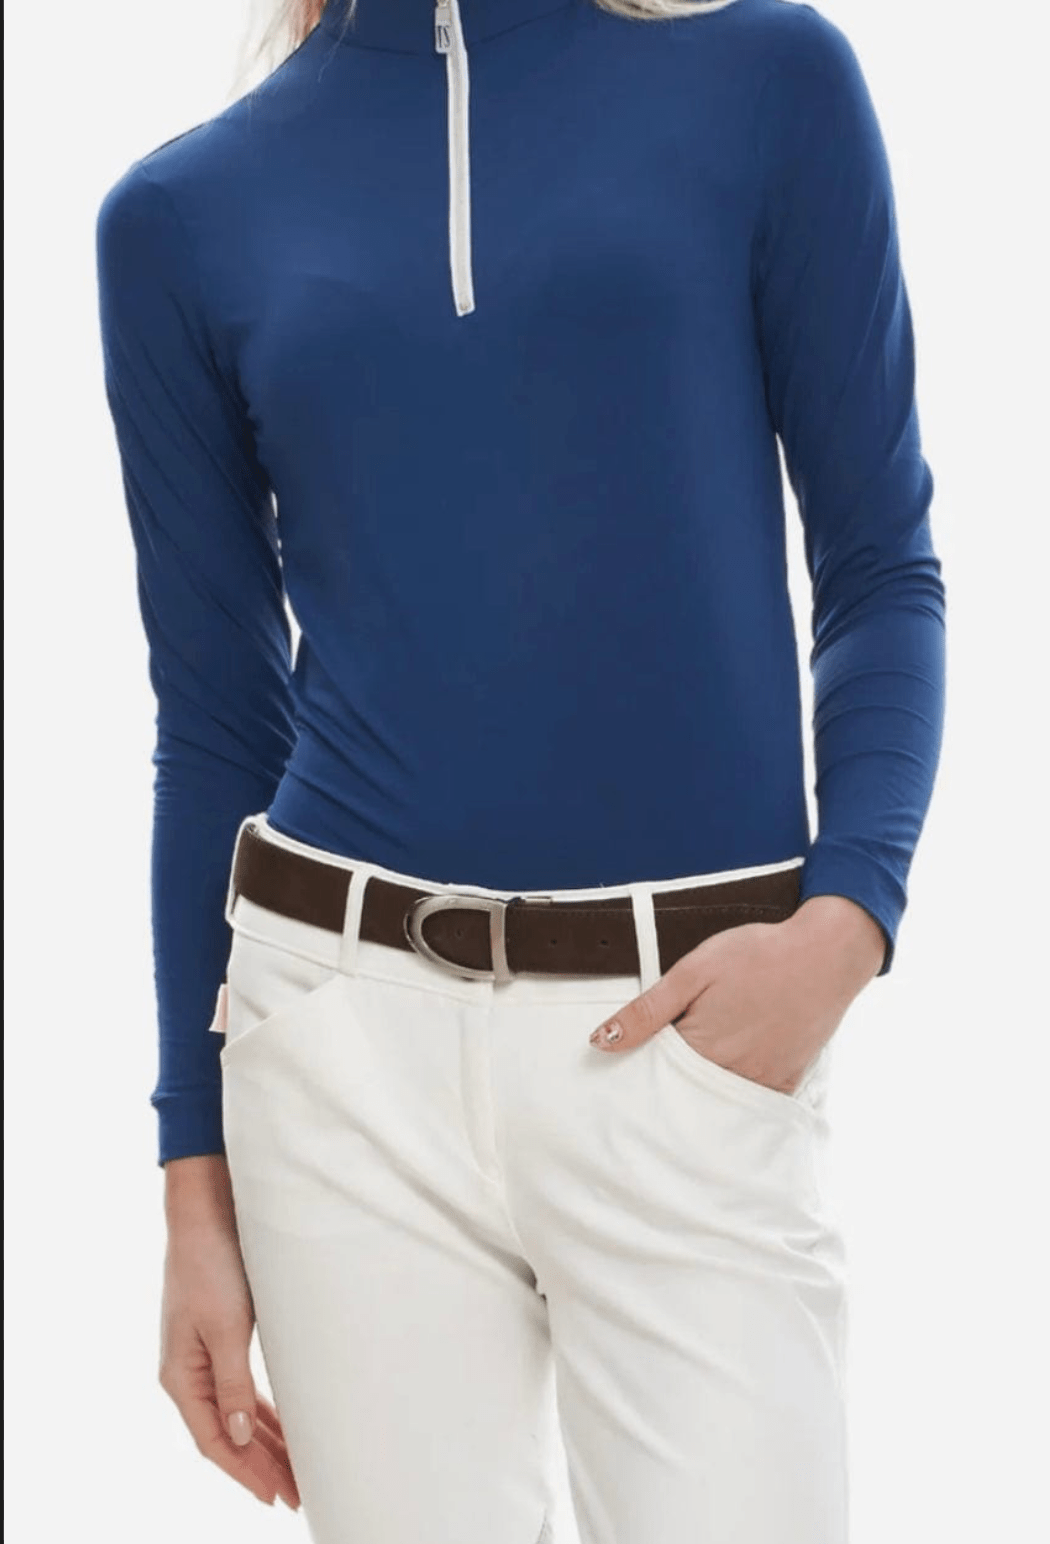 Tailored Sportsman Sun Shirt Blueberry/silver Tailored Sportsman Sun Shirt Long Sleeve XS equestrian team apparel online tack store mobile tack store custom farm apparel custom show stable clothing equestrian lifestyle horse show clothing riding clothes horses equestrian tack store